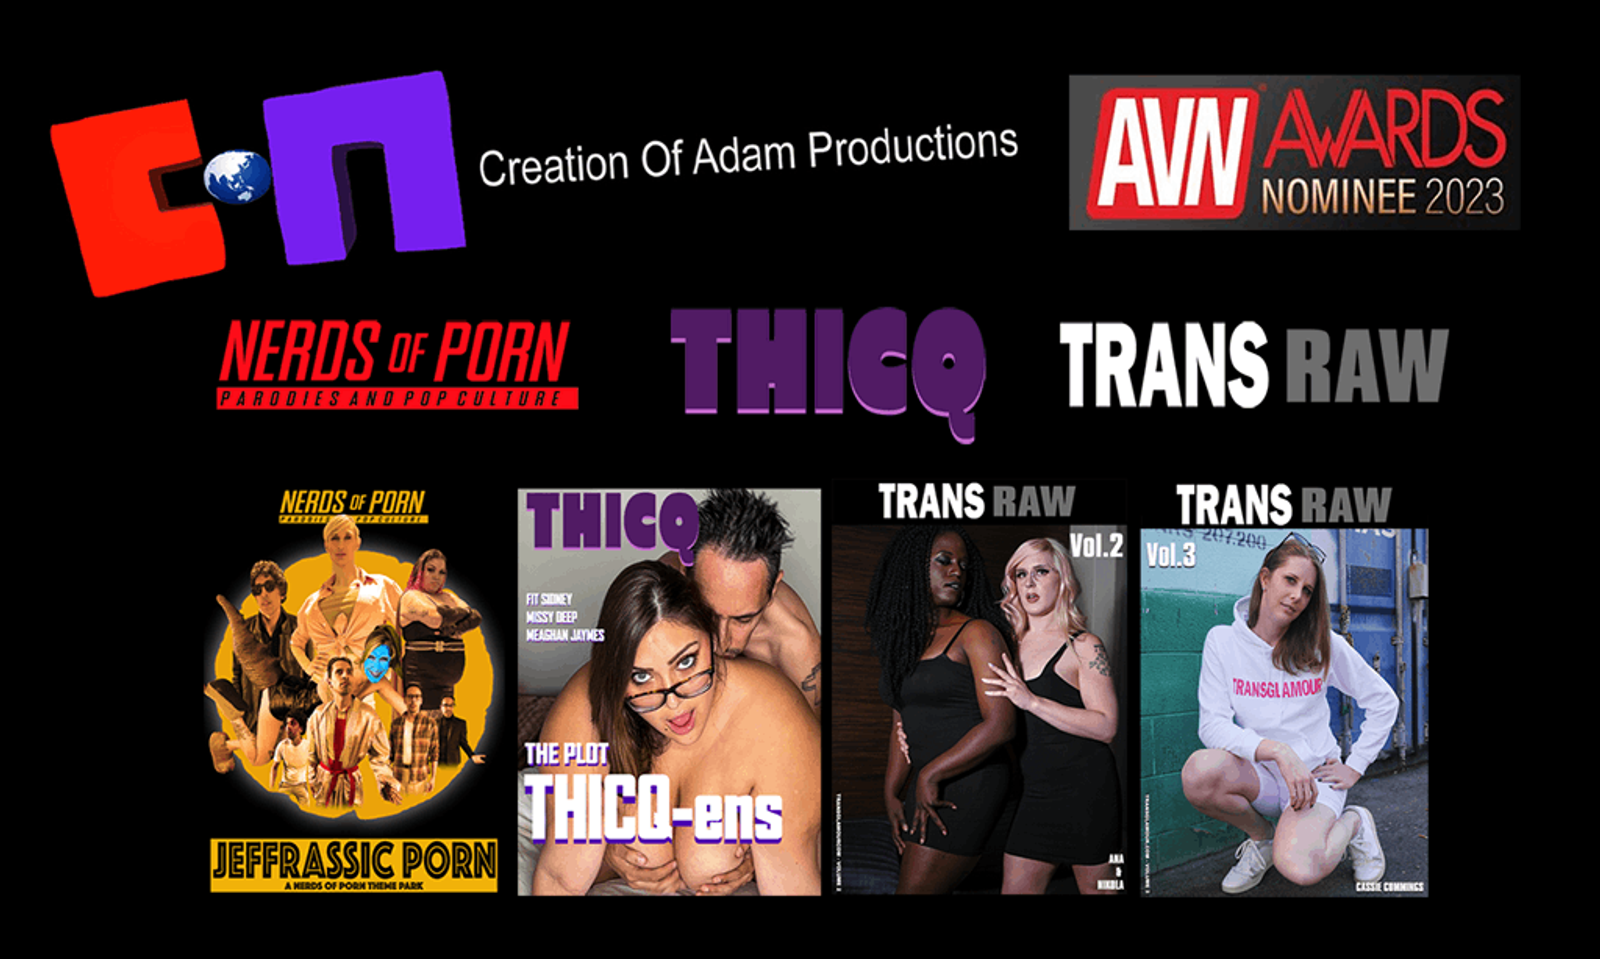 Creation of Adam Productions Honored With AVN Nominations